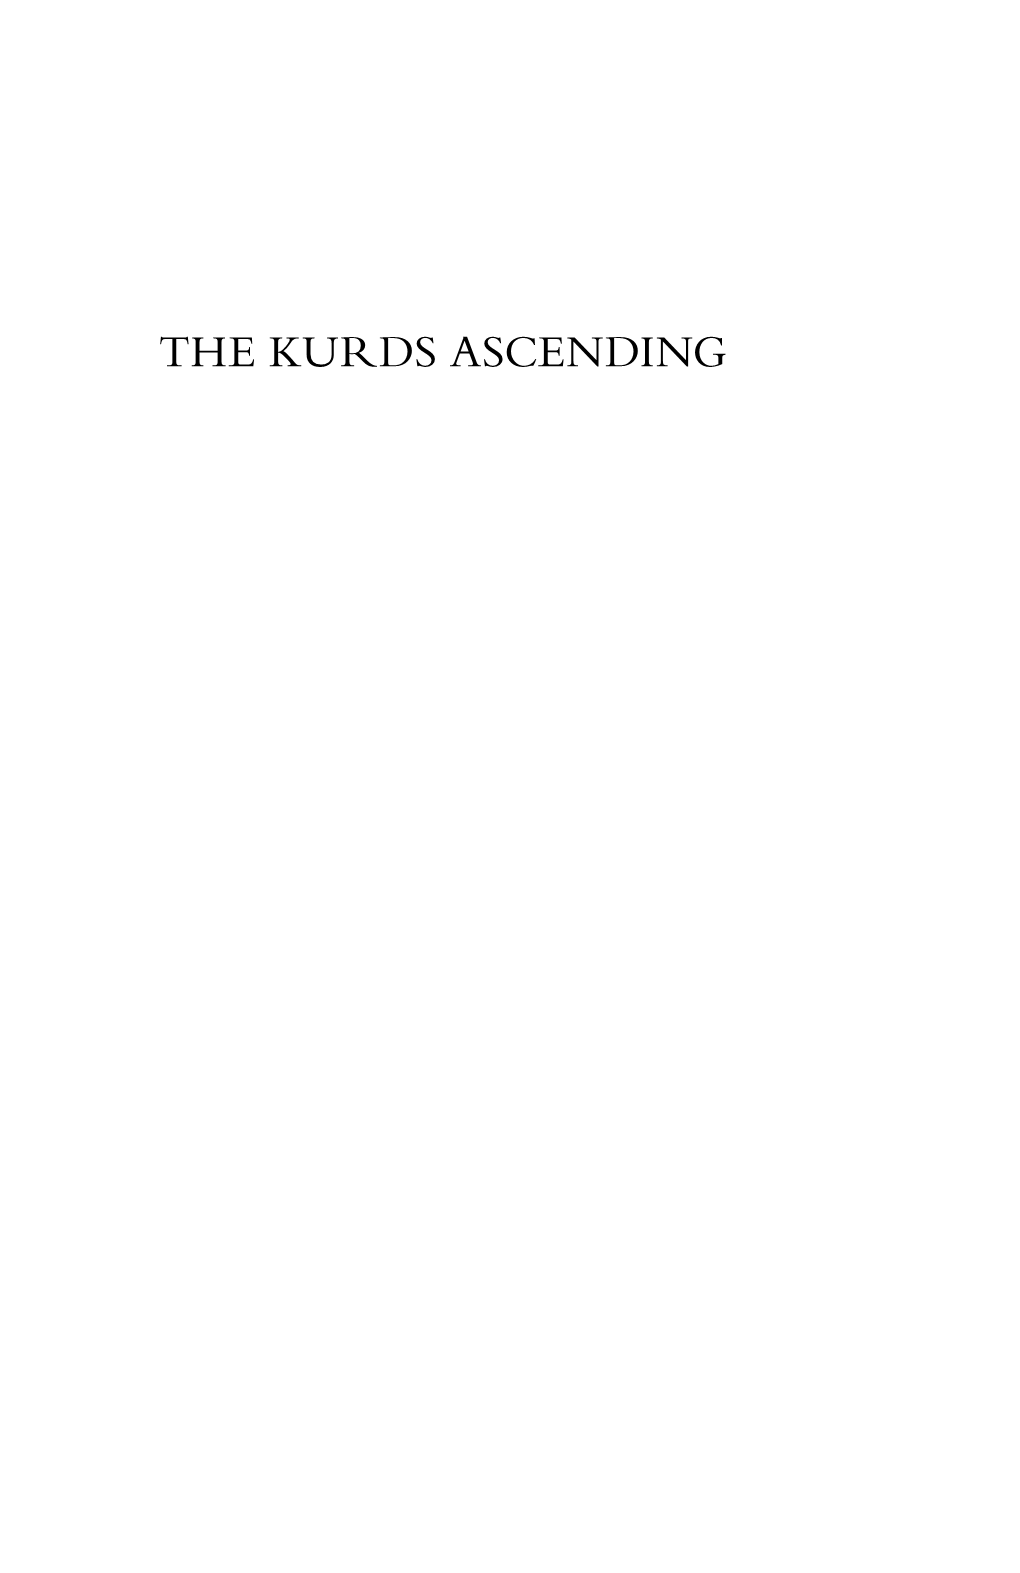 THE KURDS ASCENDING This Page Intentionally Left Blank the KURDS ASCENDING